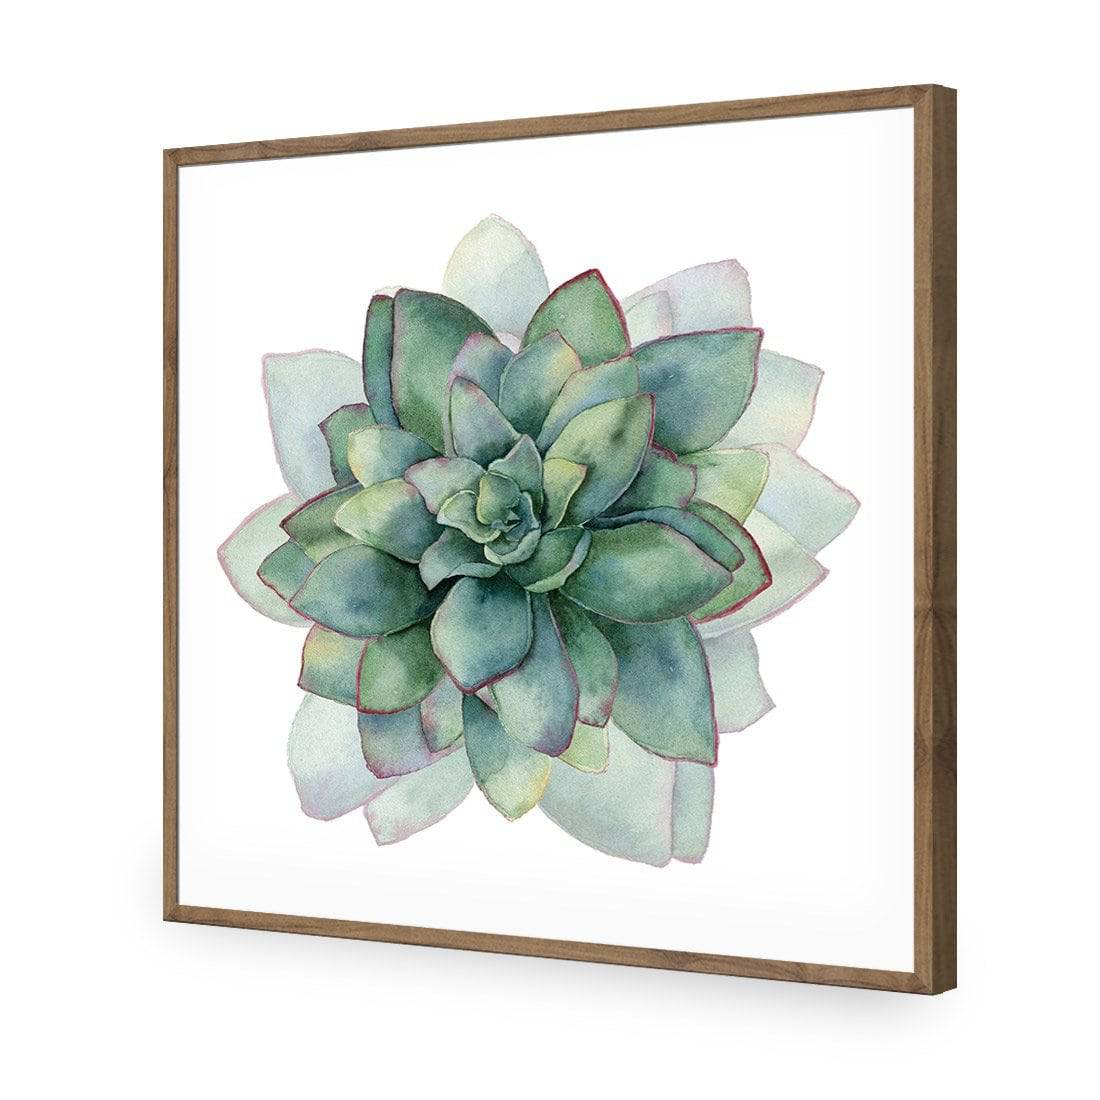 Succulent Spiral, Square-Acrylic-Wall Art Design-Without Border-Acrylic - Natural Frame-37x37cm-Wall Art Designs